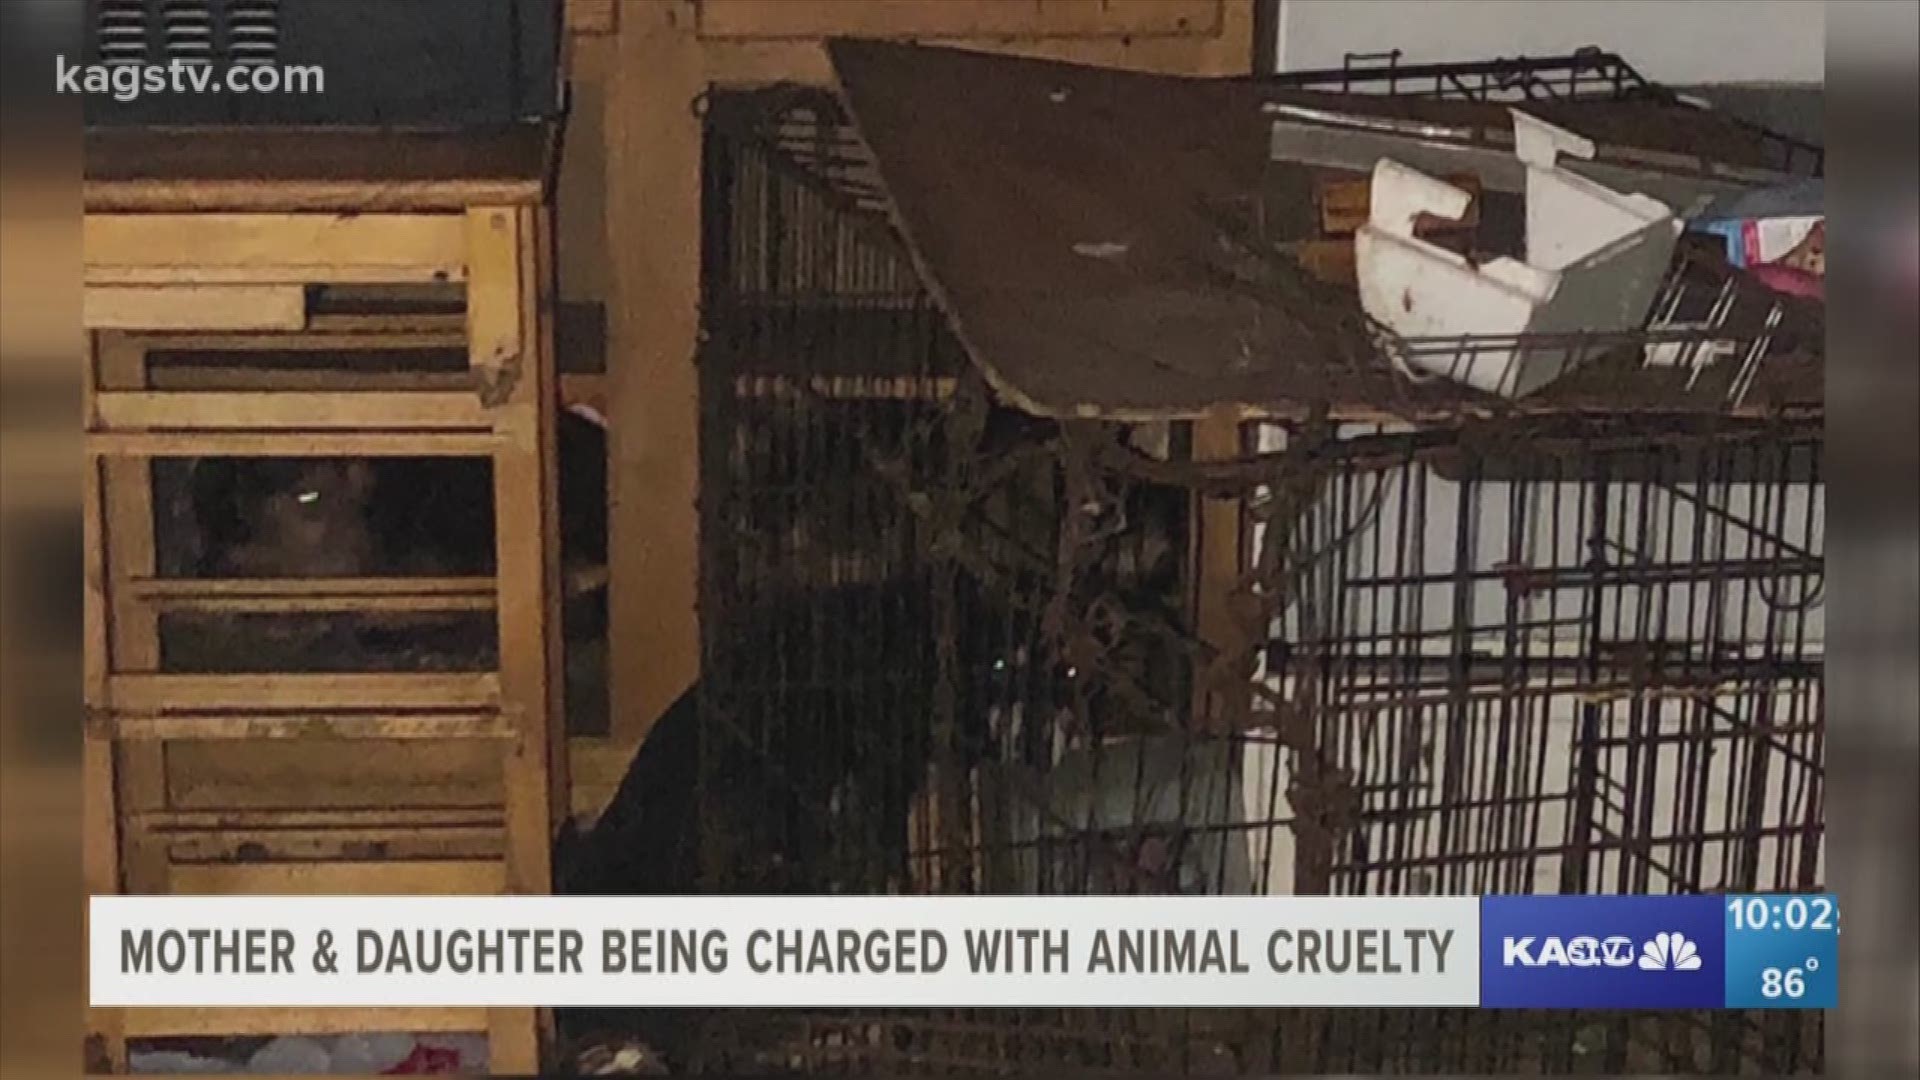 Authorities in Madison County are still investigating the "worst case" of animal cruelty they said they've ever seen.